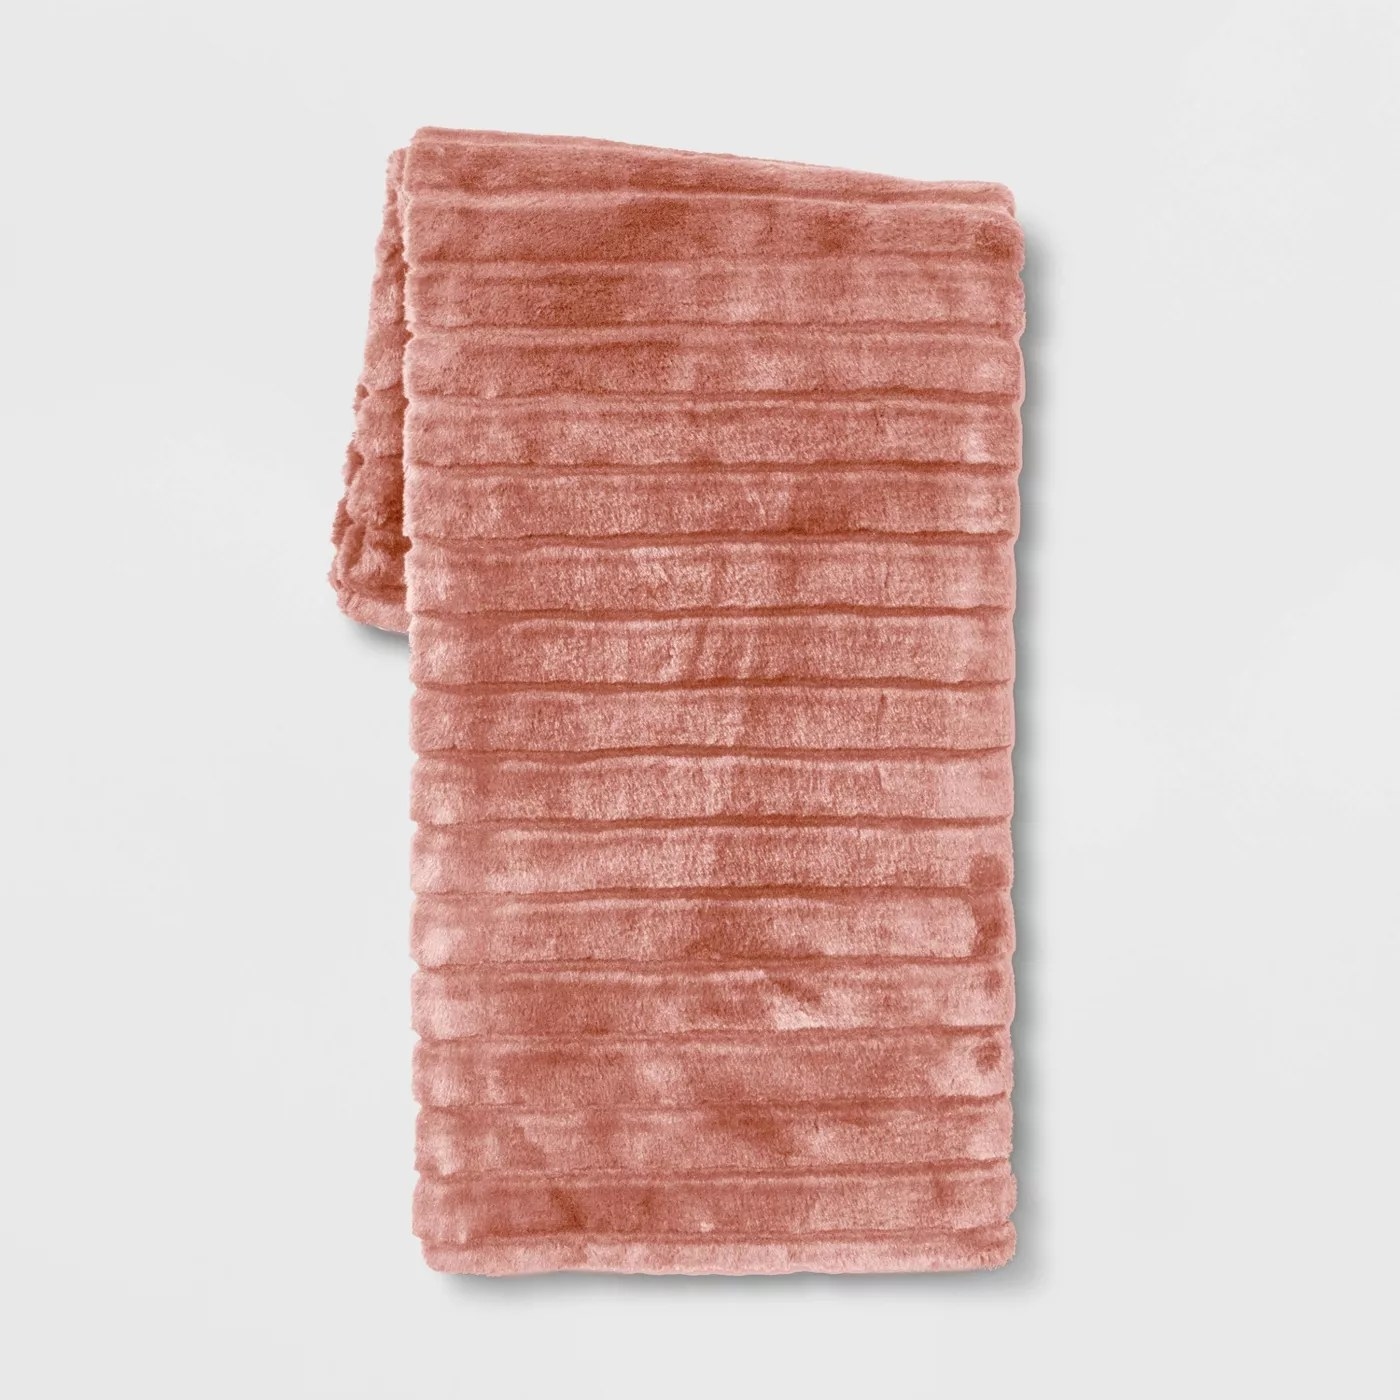 The coral-colored faux fur throw with ribbed texture on one side